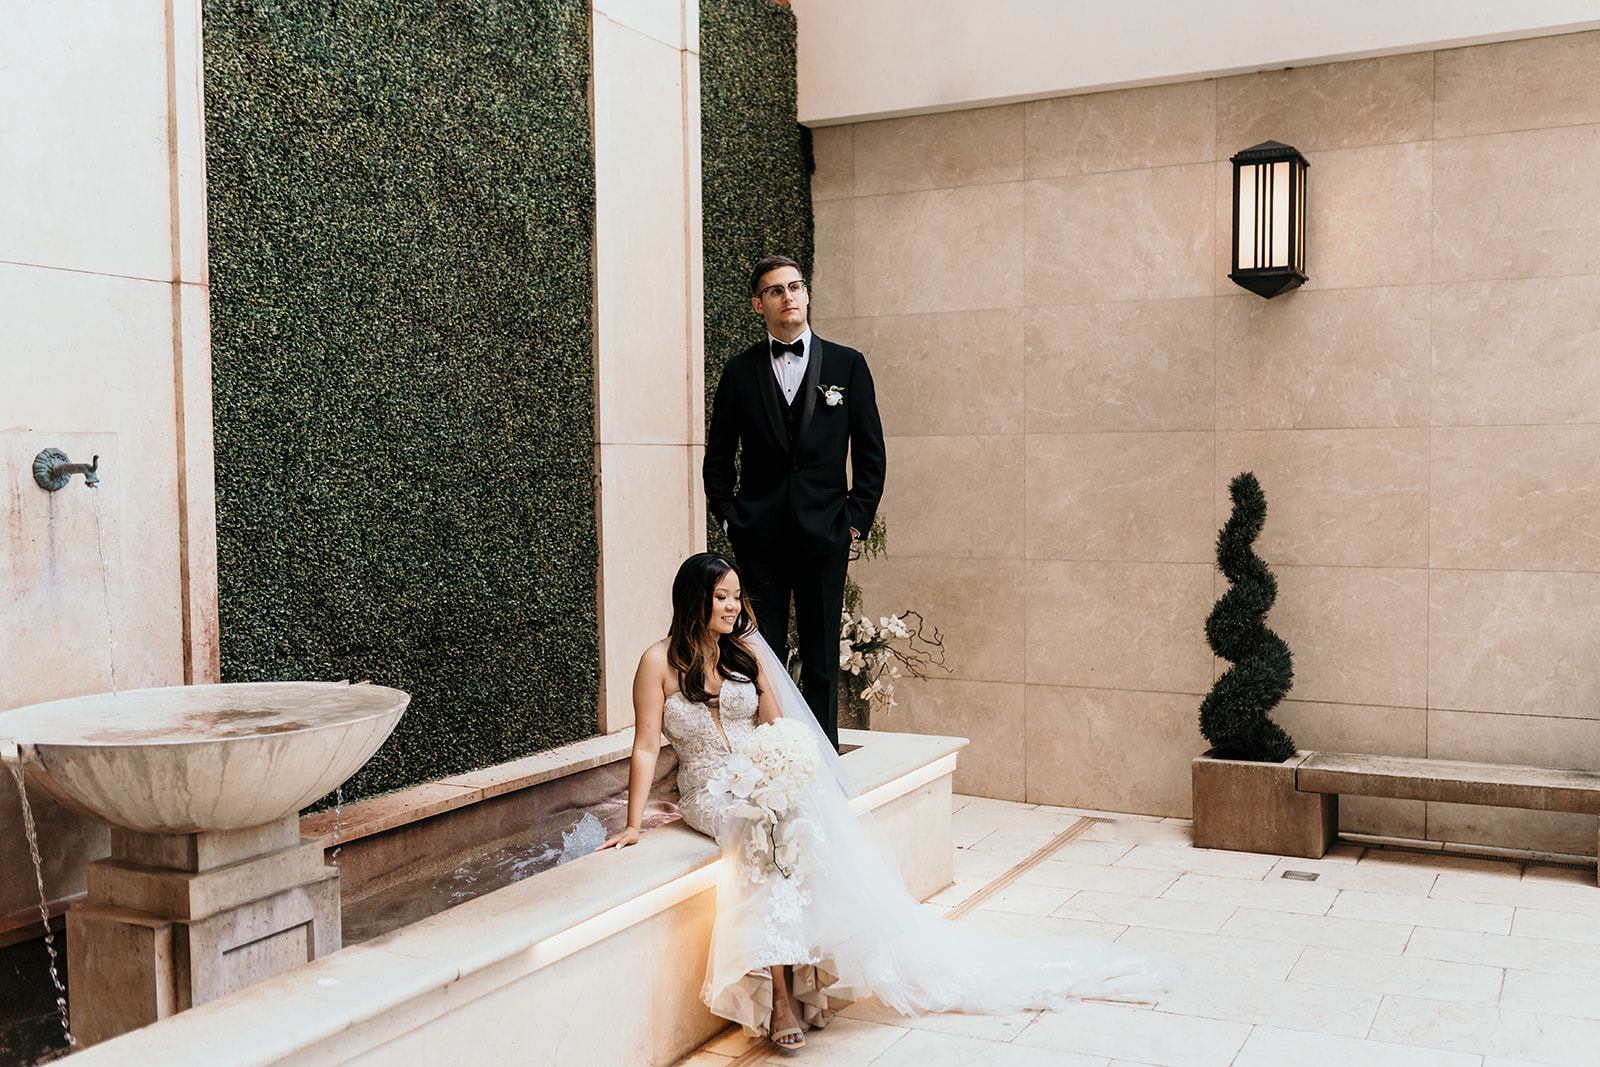 Classic wedding at the Curtiss Hotel in Buffalo, NY